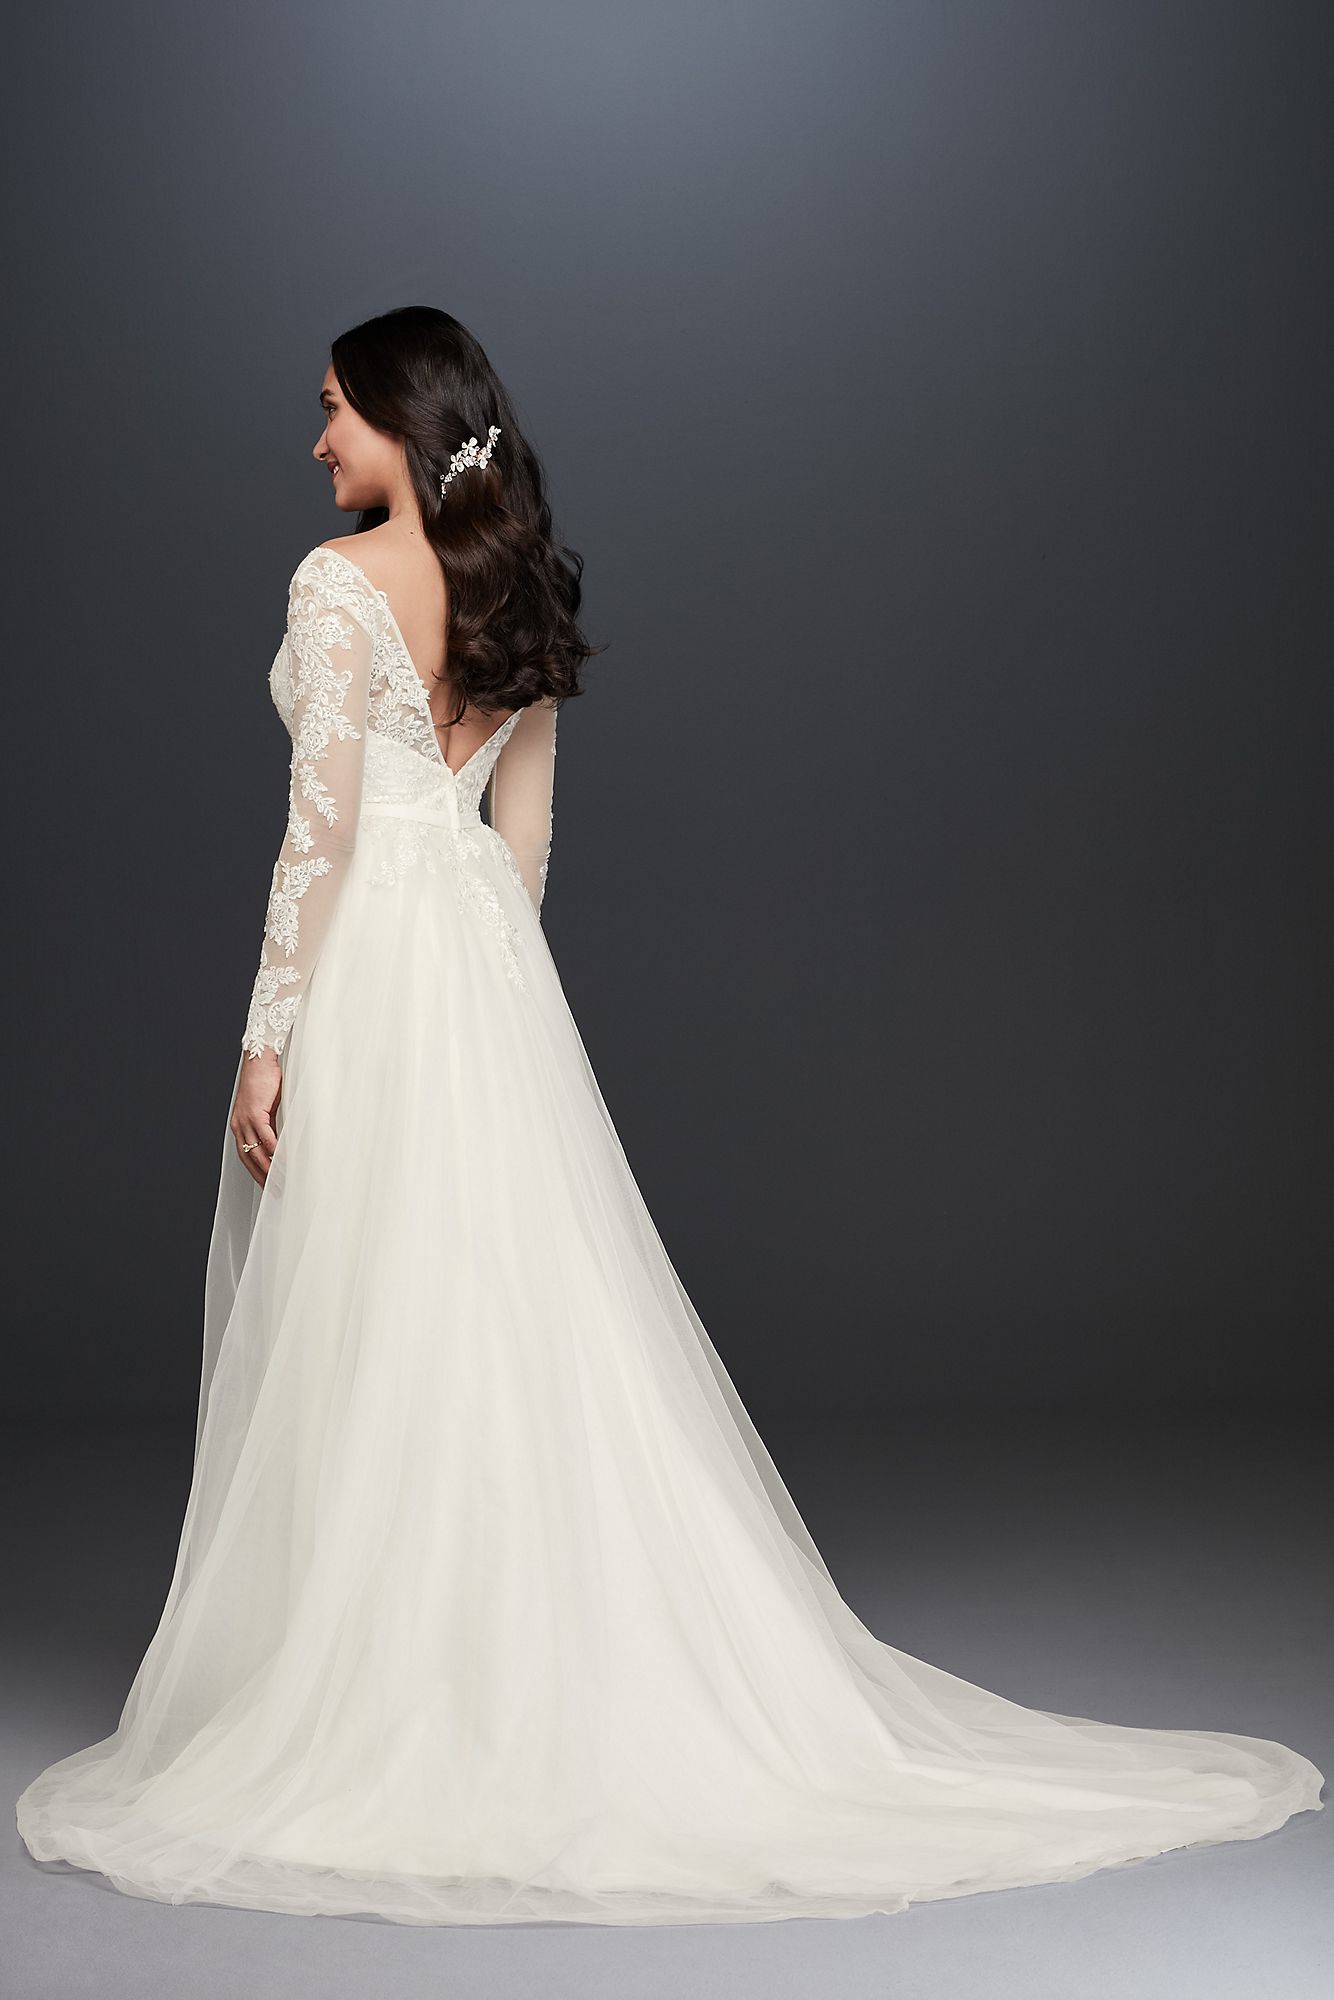 Long Sleeve Wedding Dress With Low Back   Collection WG3831